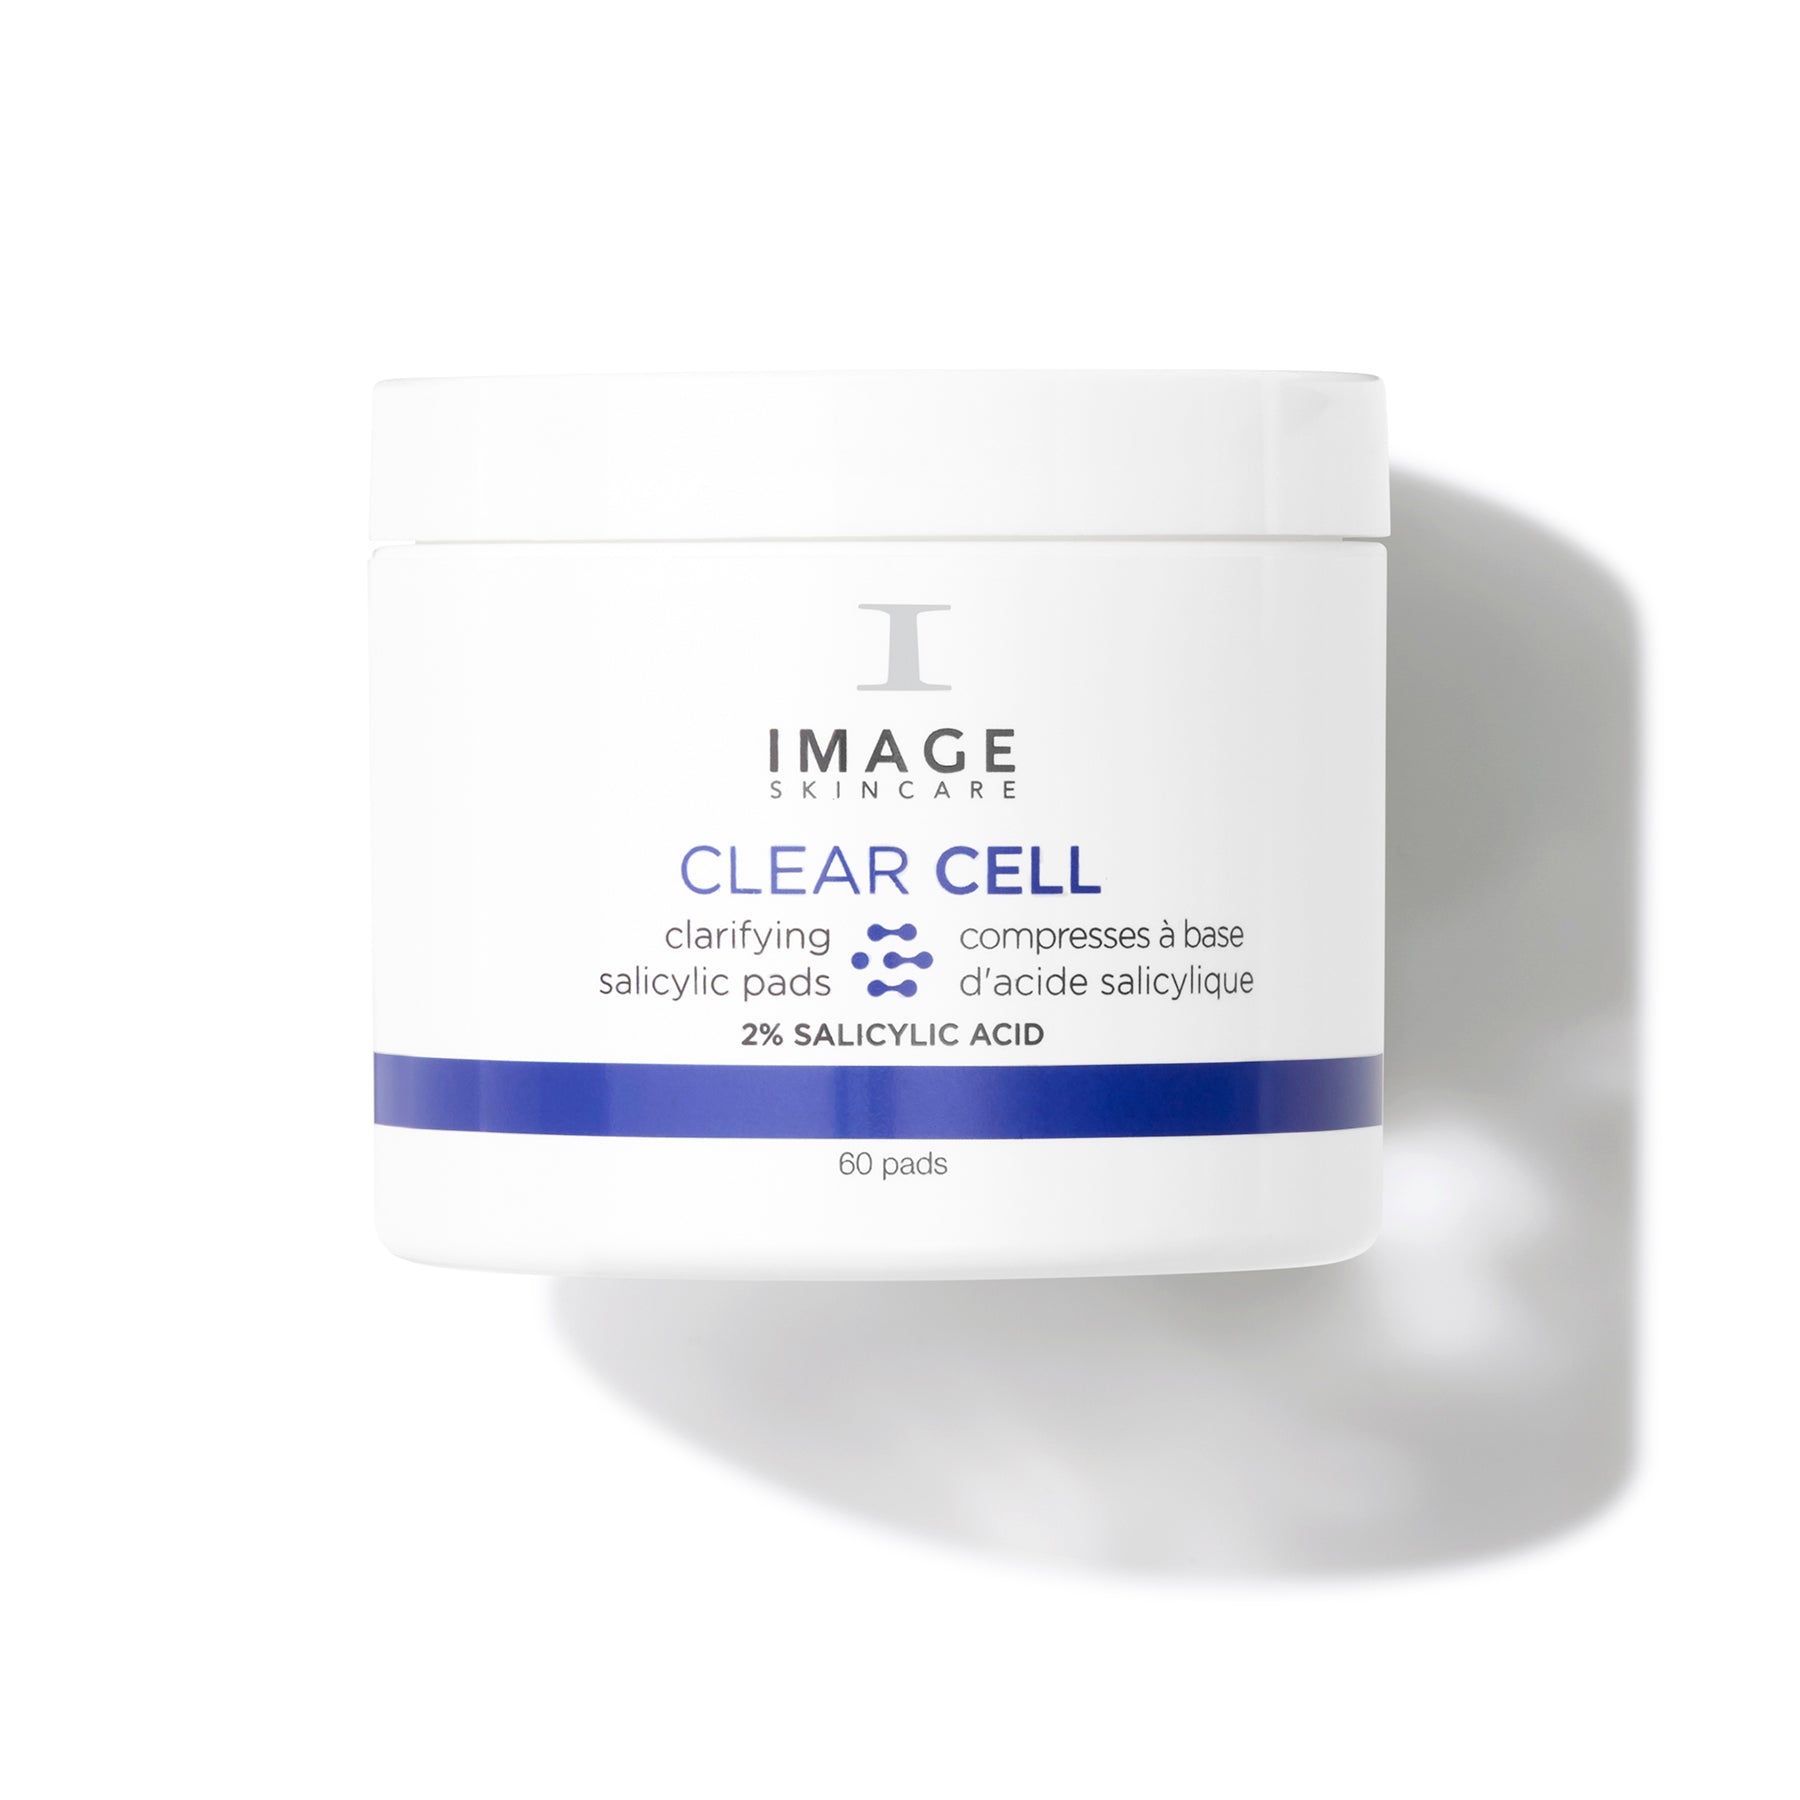 Image Skincare Clear Cell Pads